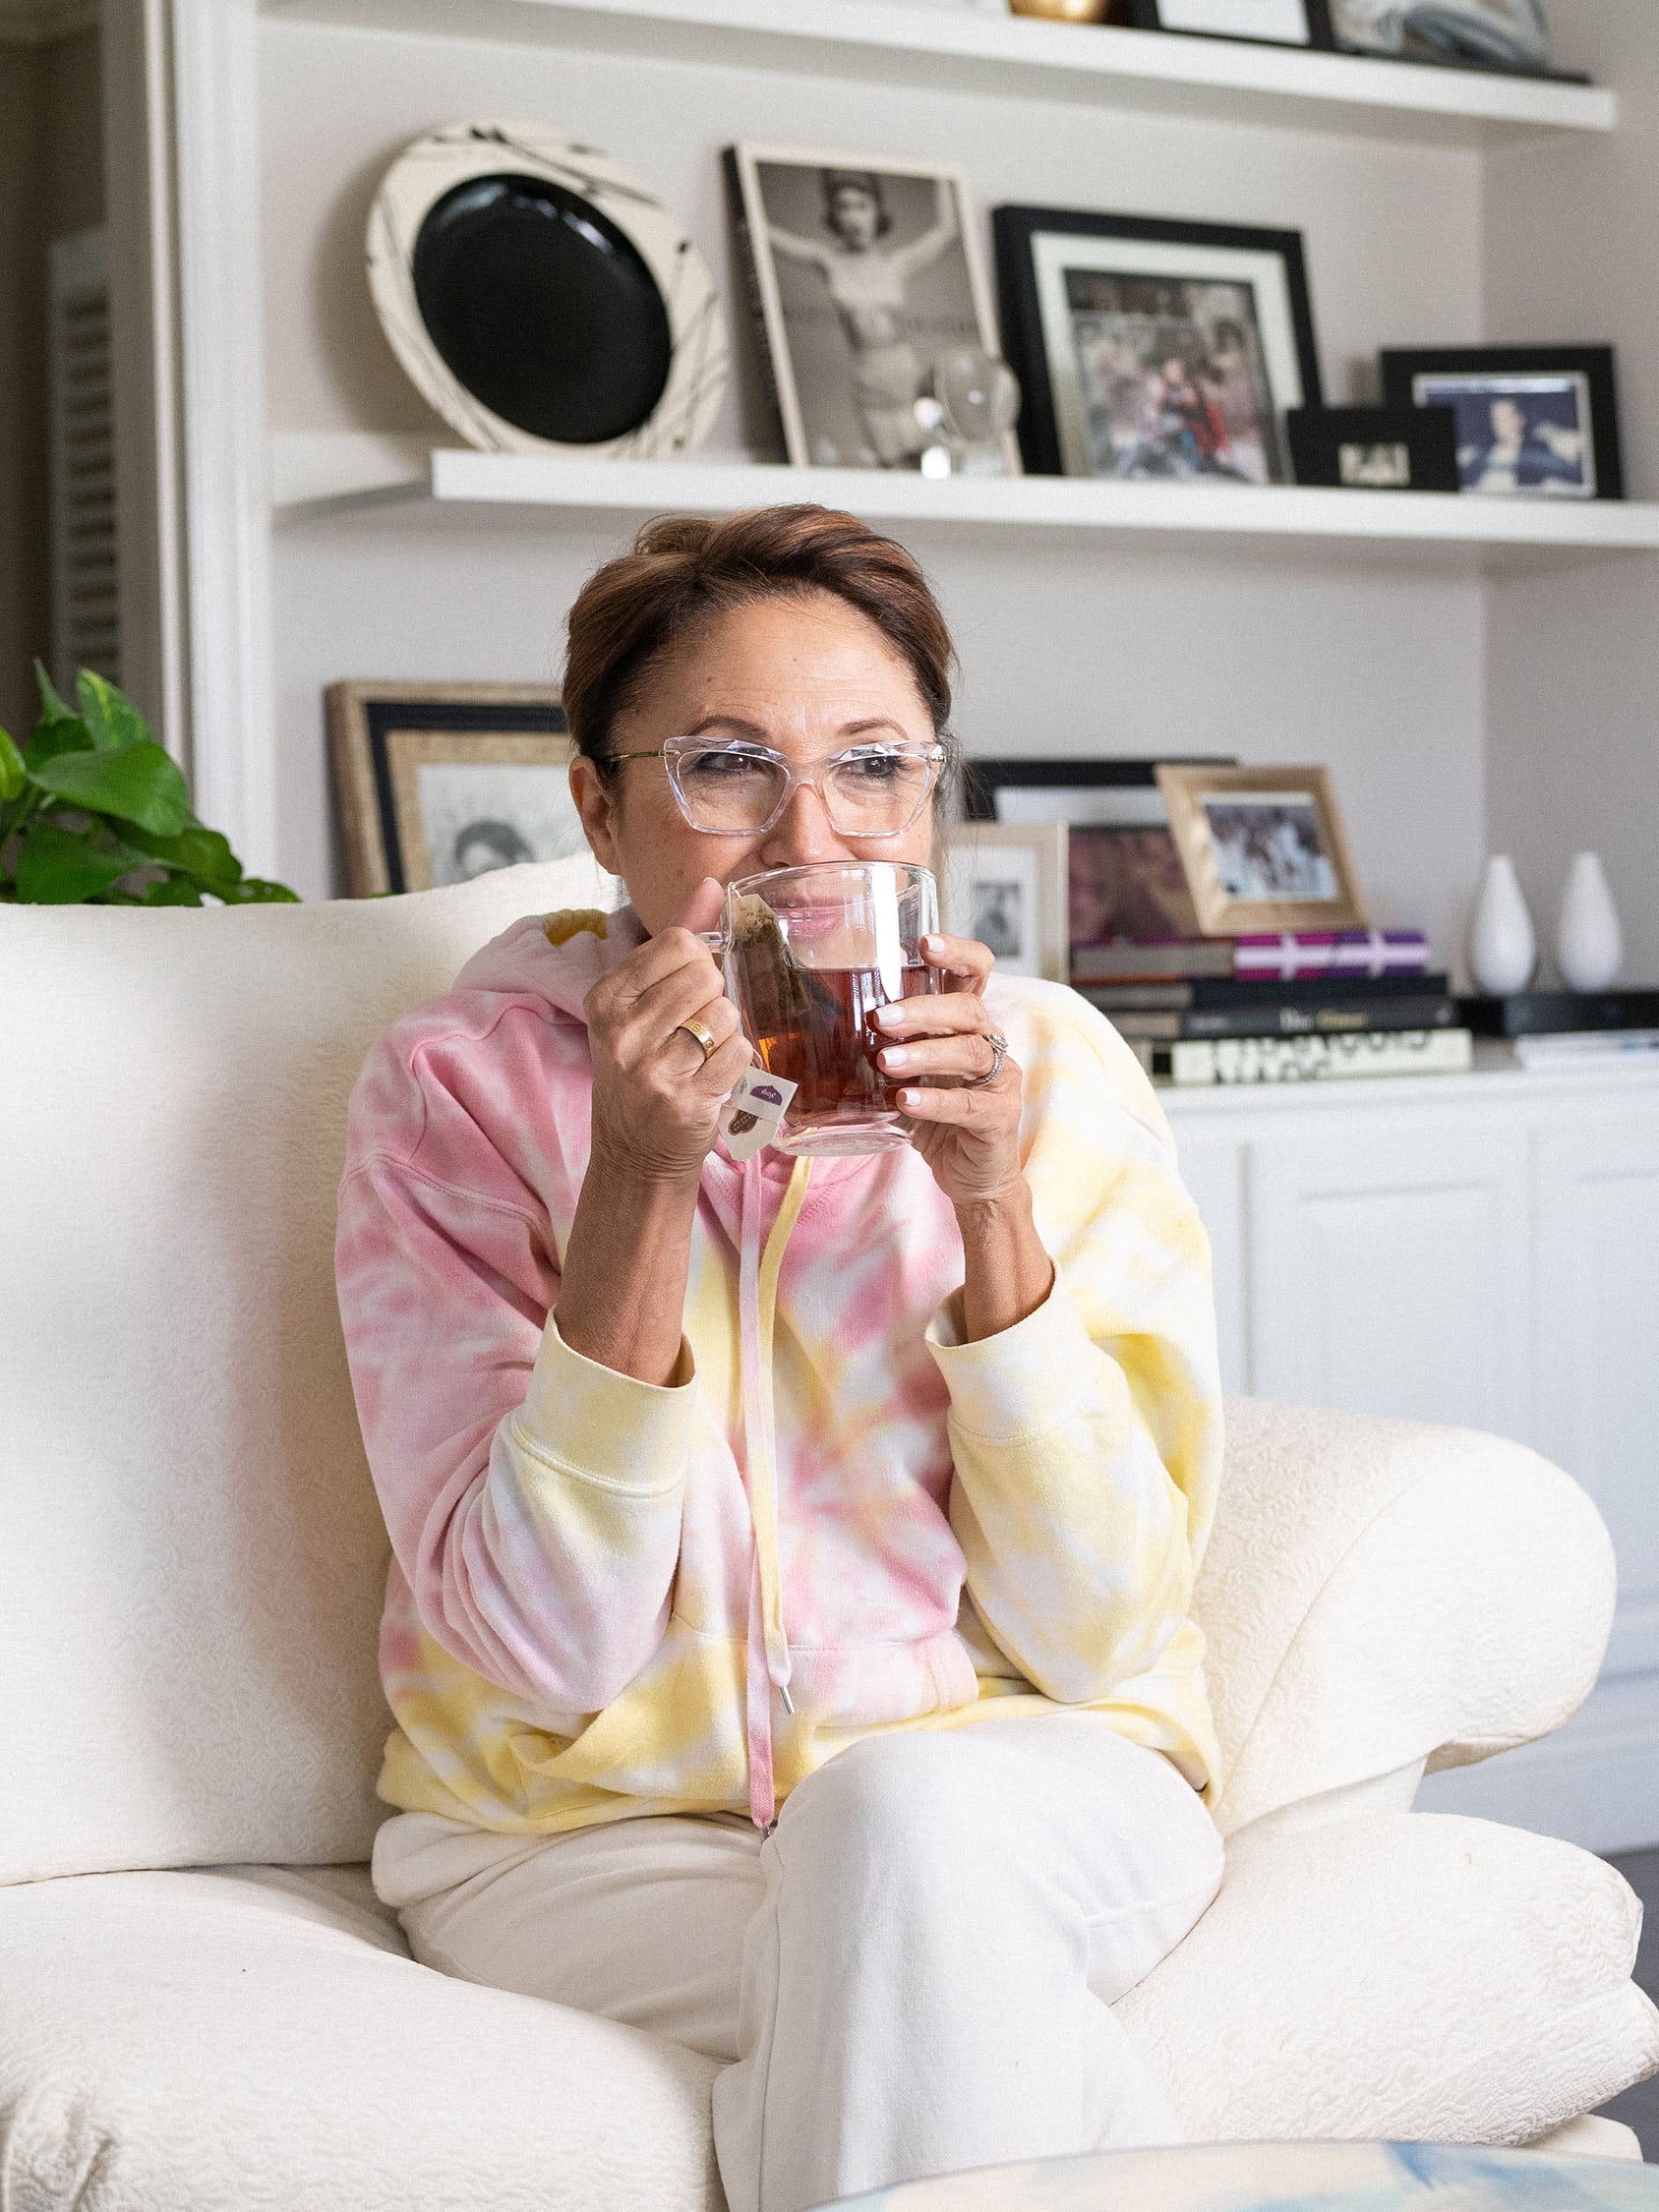 Margarita Arriagada, founder of Valde Beauty, enjoying a cup of tea while sitting in her living room.